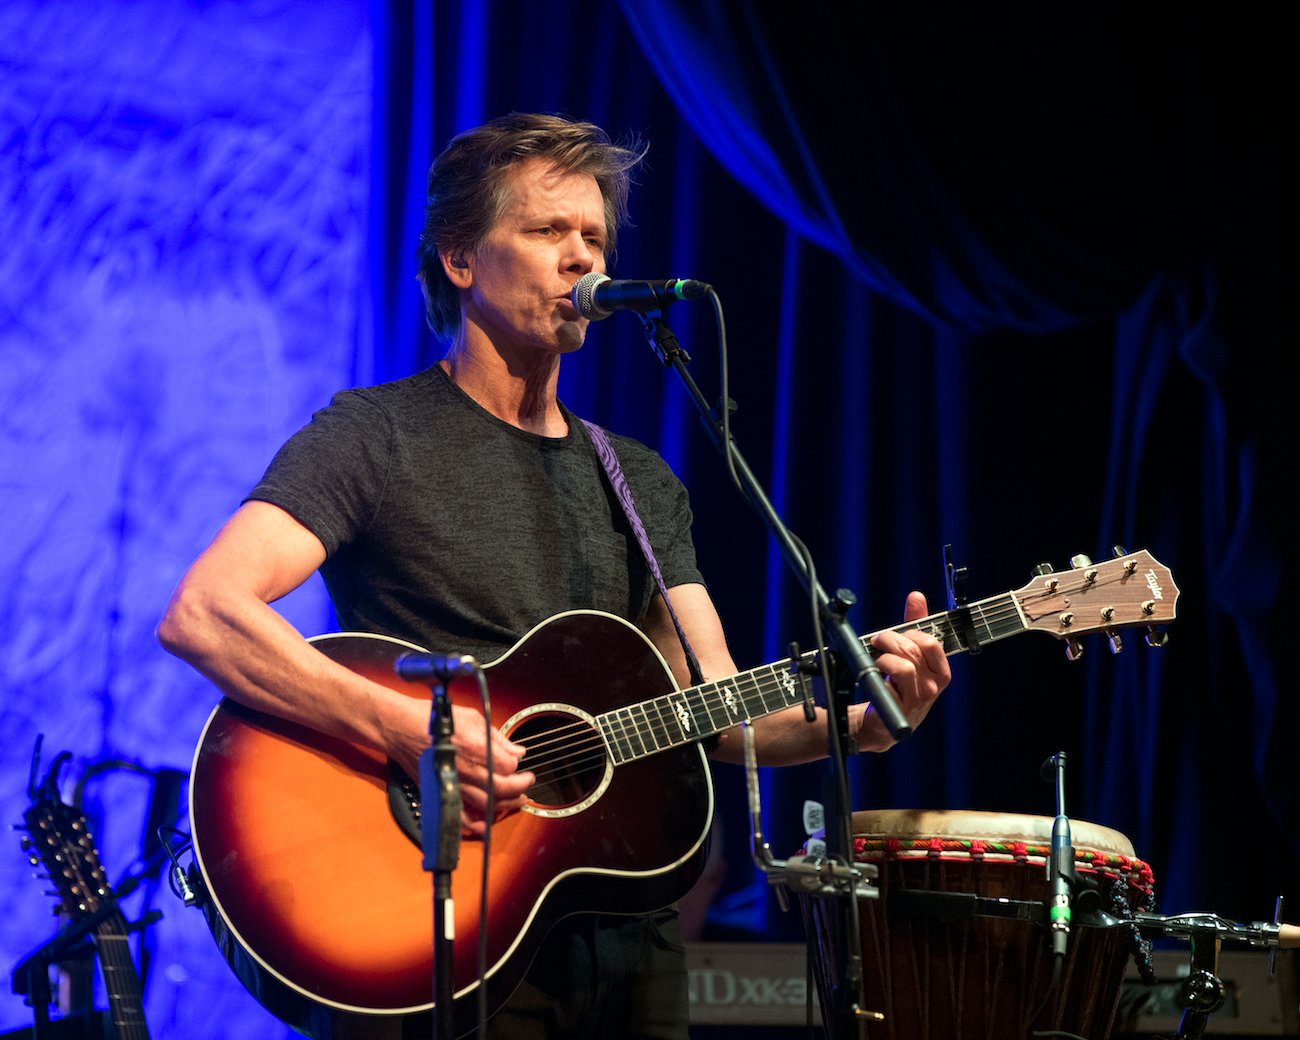 Kevin Bacon performing in New York City in 2019.